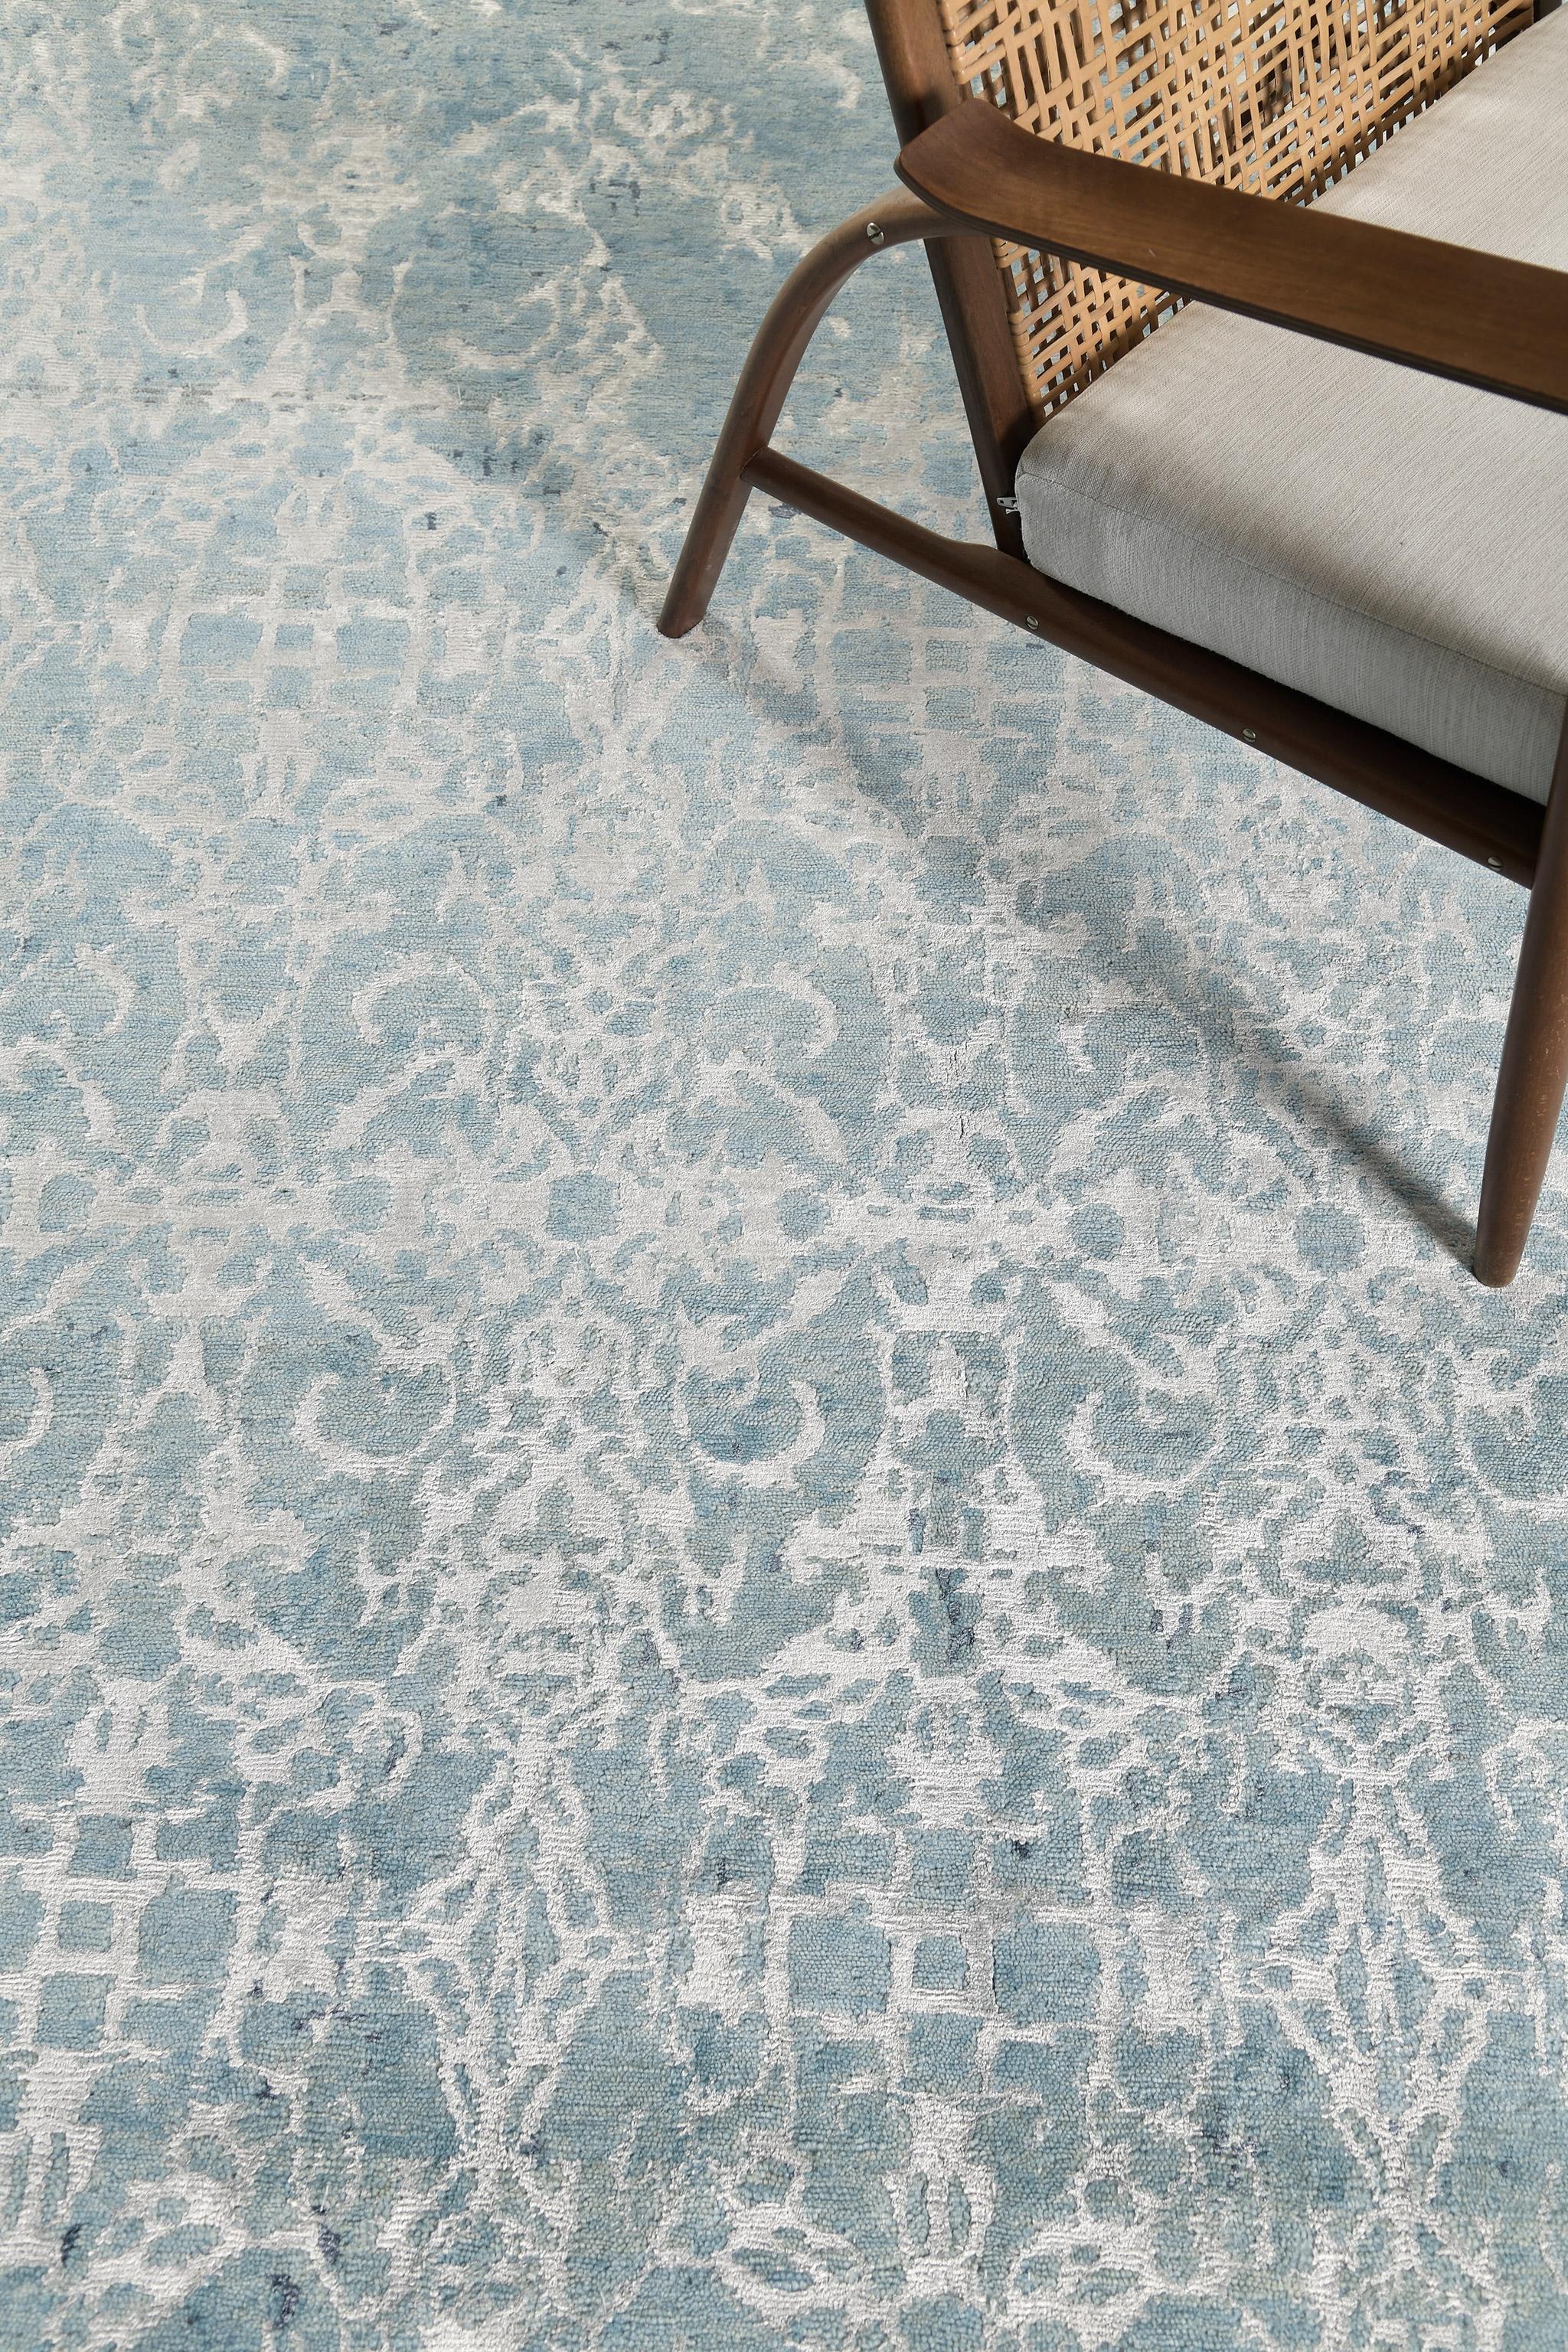 The Dolce Bamboo Silk Rug is a timeless combination of style and practicality. In a beautiful teal, white, gray, black, and sophisticated design, its luxurious construction makes this modern rug a glamorous choice. A creation that will be adored by